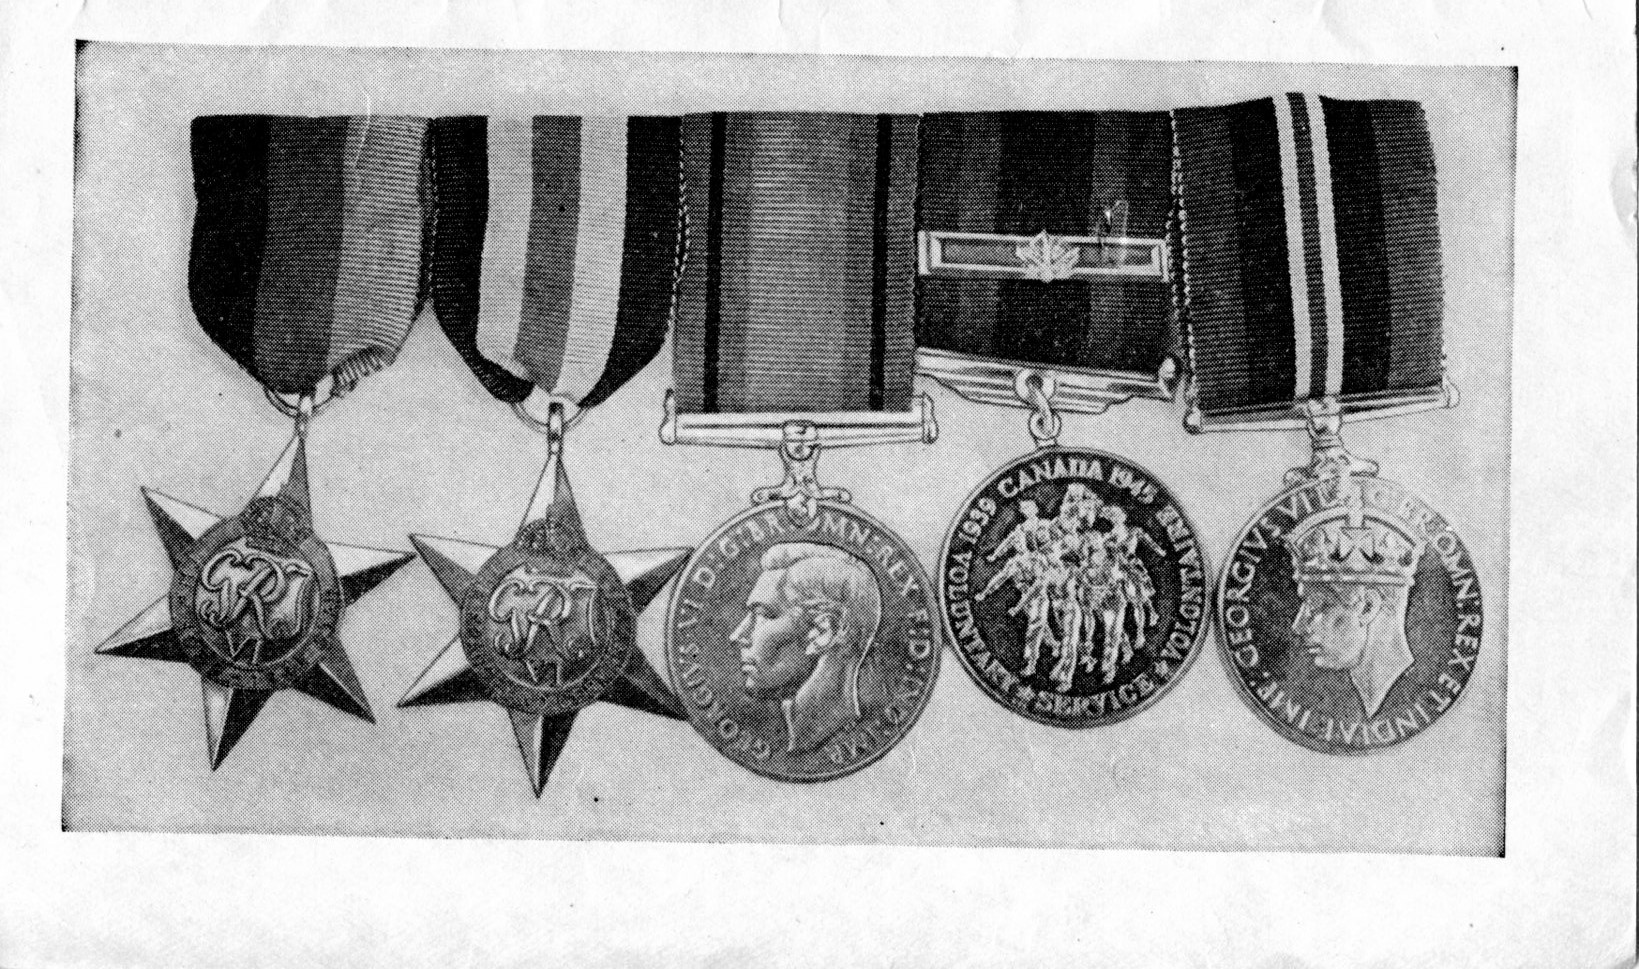 Page 11 - Information regarding mounting and wearing of decorations, campaign stars and medals, published by the Department of Veterans Affairs Canada circa 1945.